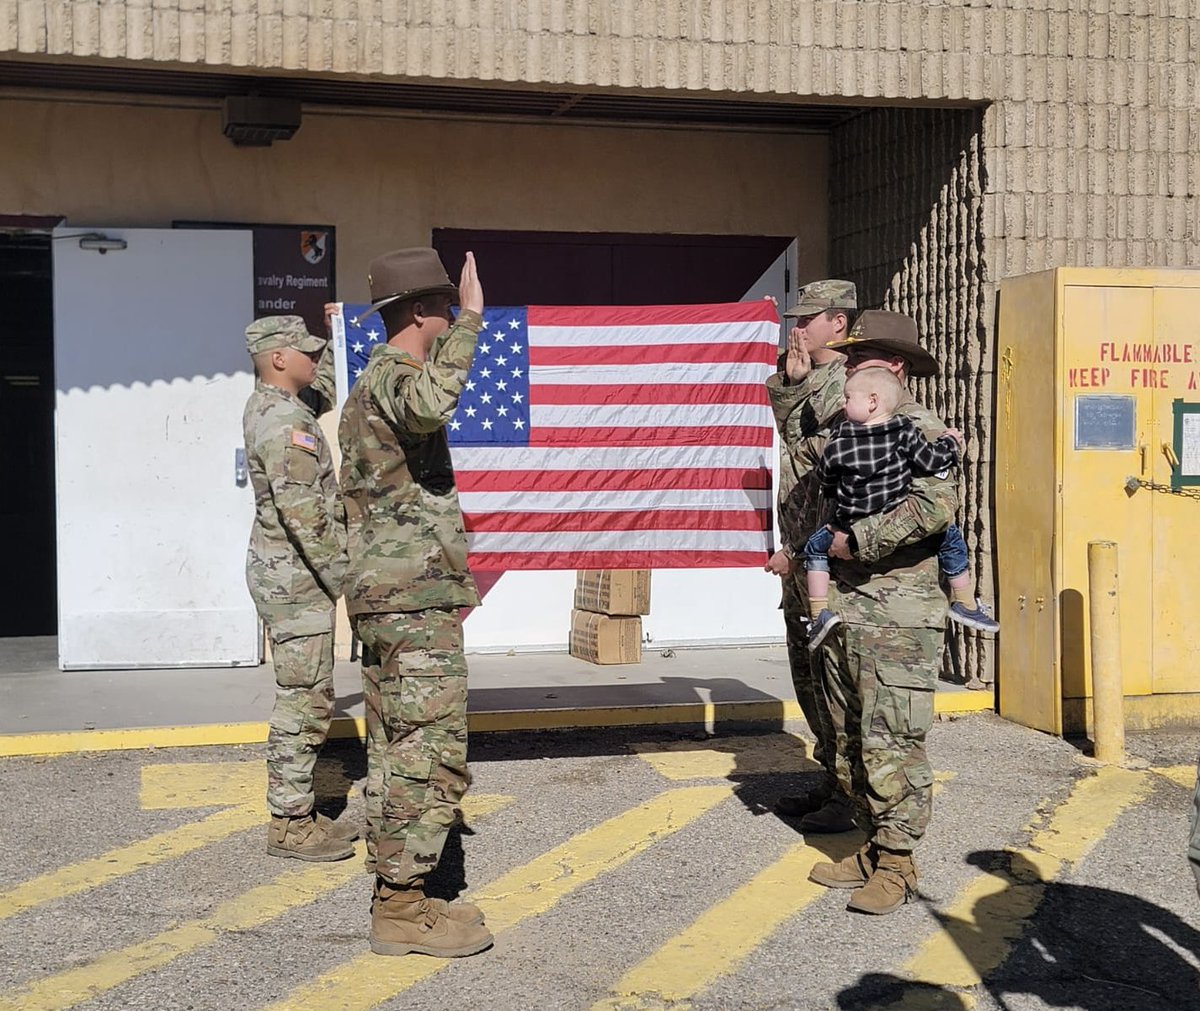 Congratulations to our newly promoted soldiers, PFC Caden Manley and SGT Matthew Peebles! We also got the opportunity to experience SGT Aeron Britt’s reenlistment ceremony. We are very proud and excited for the opportunities he is taking advantage of!! Amazing job guys!!